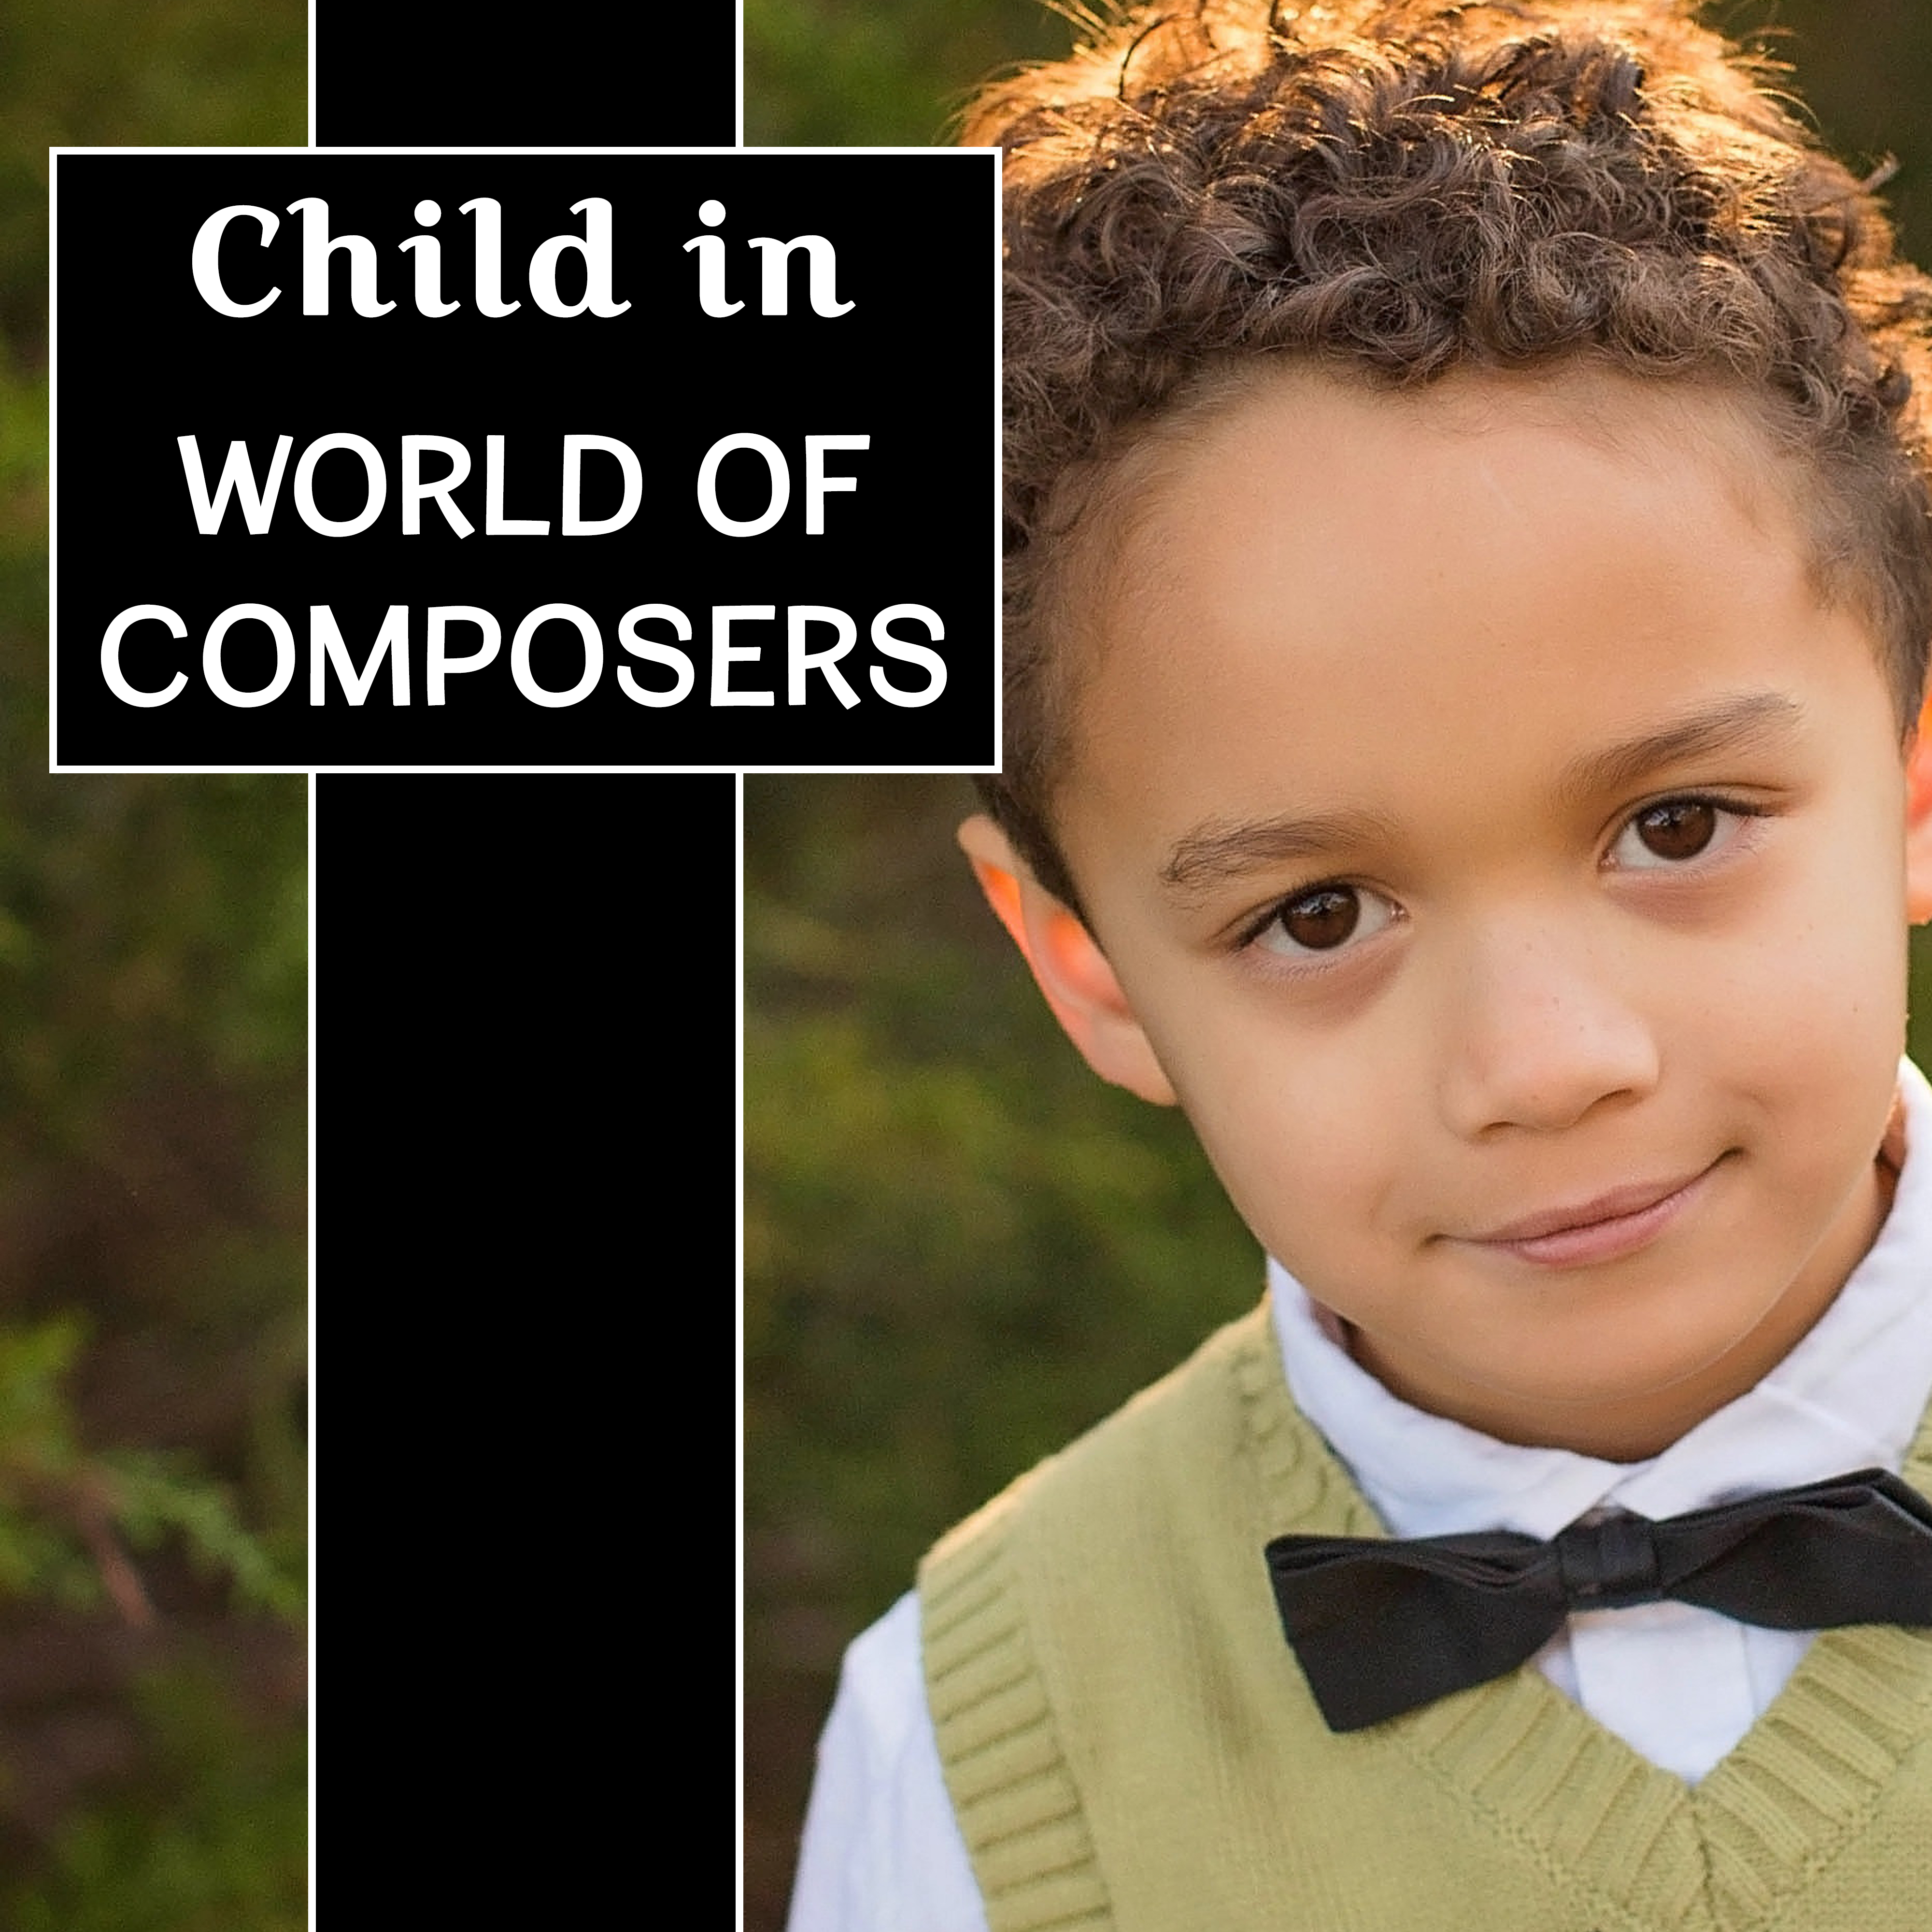 Child in World of Composers  Best Classical Music for Kids, Einstein Effect, Instrumental Sounds for Listening, Relaxation, Baby Music